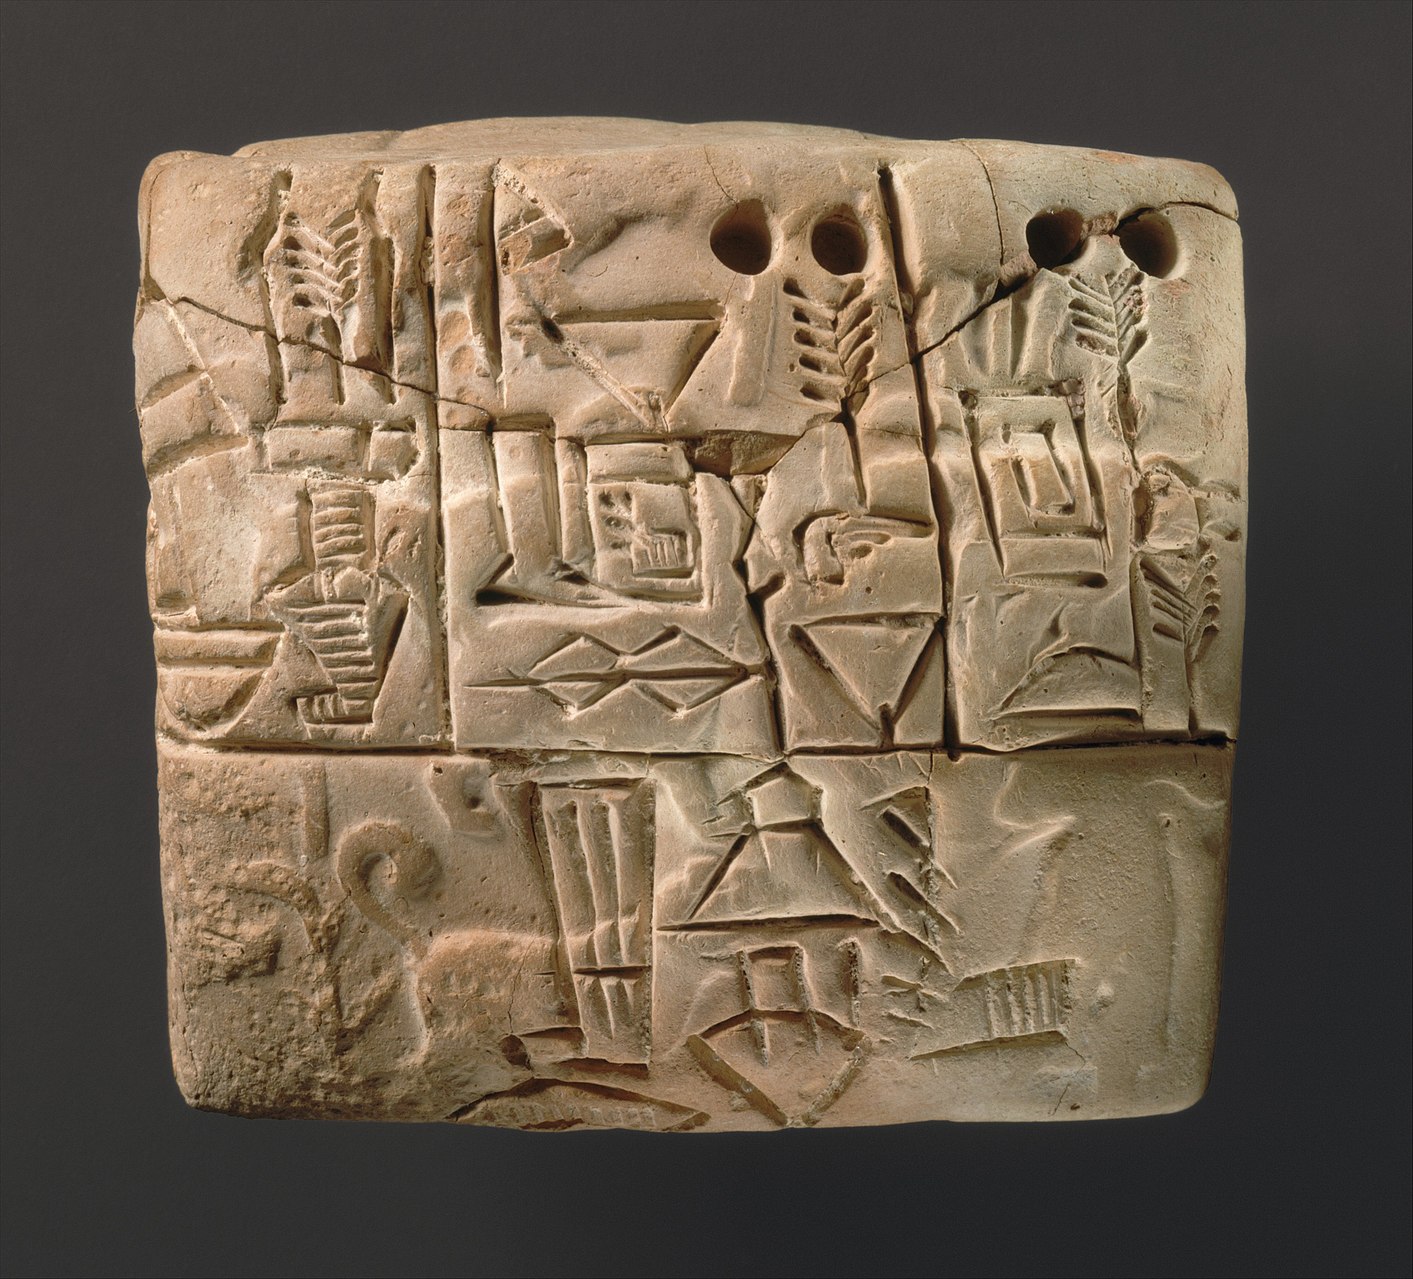 cuneiform_tablet-_administrative_account_of_barley_distribution_with_cylinder_seal_impression_of_a_male_figure_hunting_dogs_and_boars_met_dt847.jpg